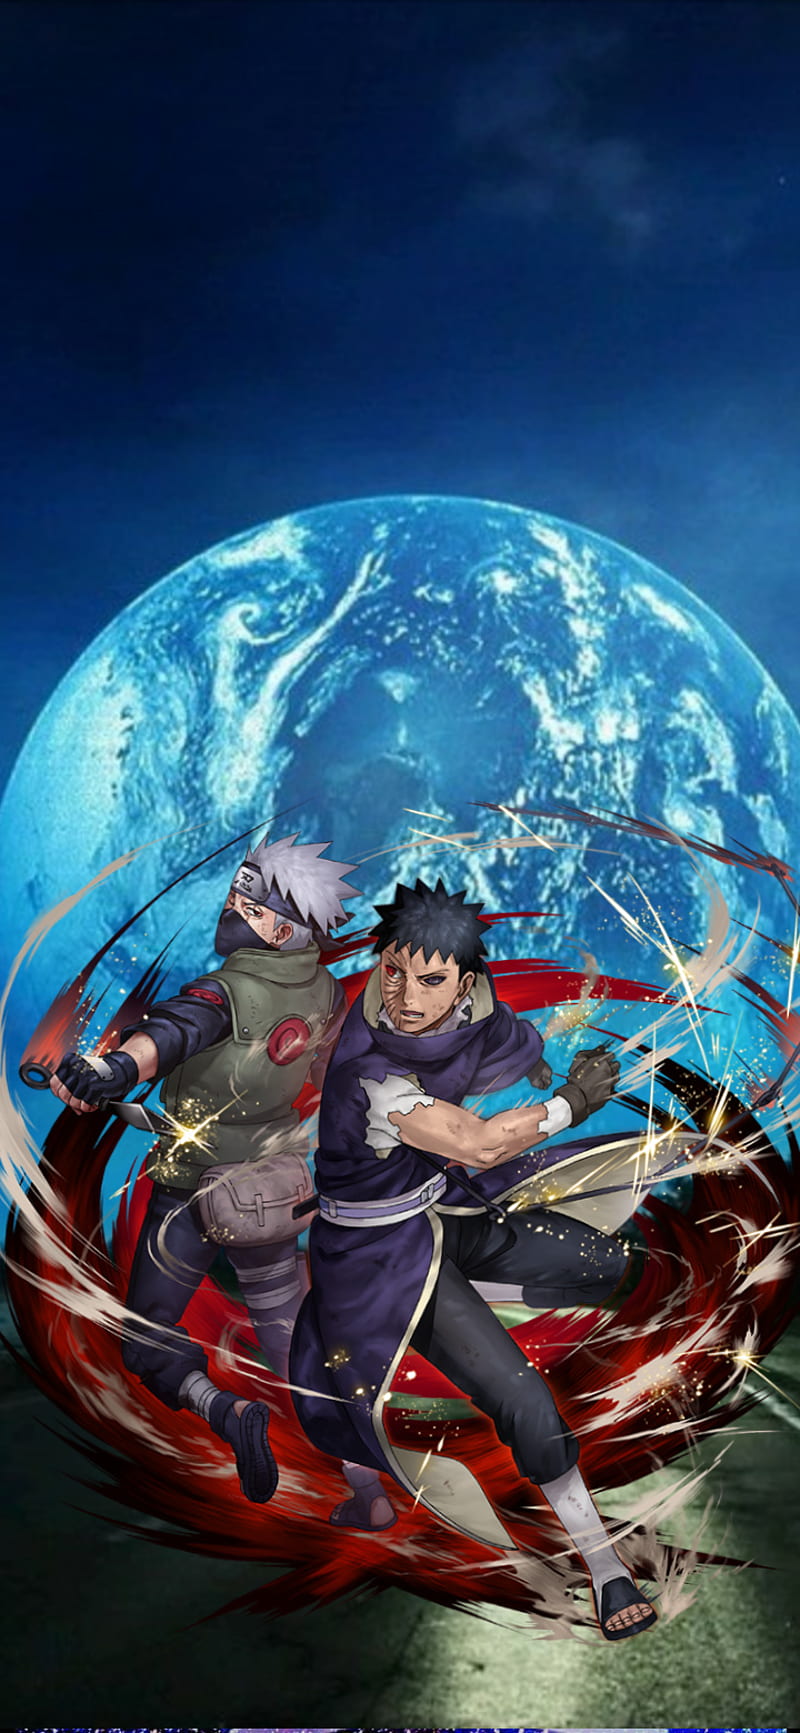 Obito And Kakashi iPhone Wallpapers - Wallpaper Cave-mncb.edu.vn